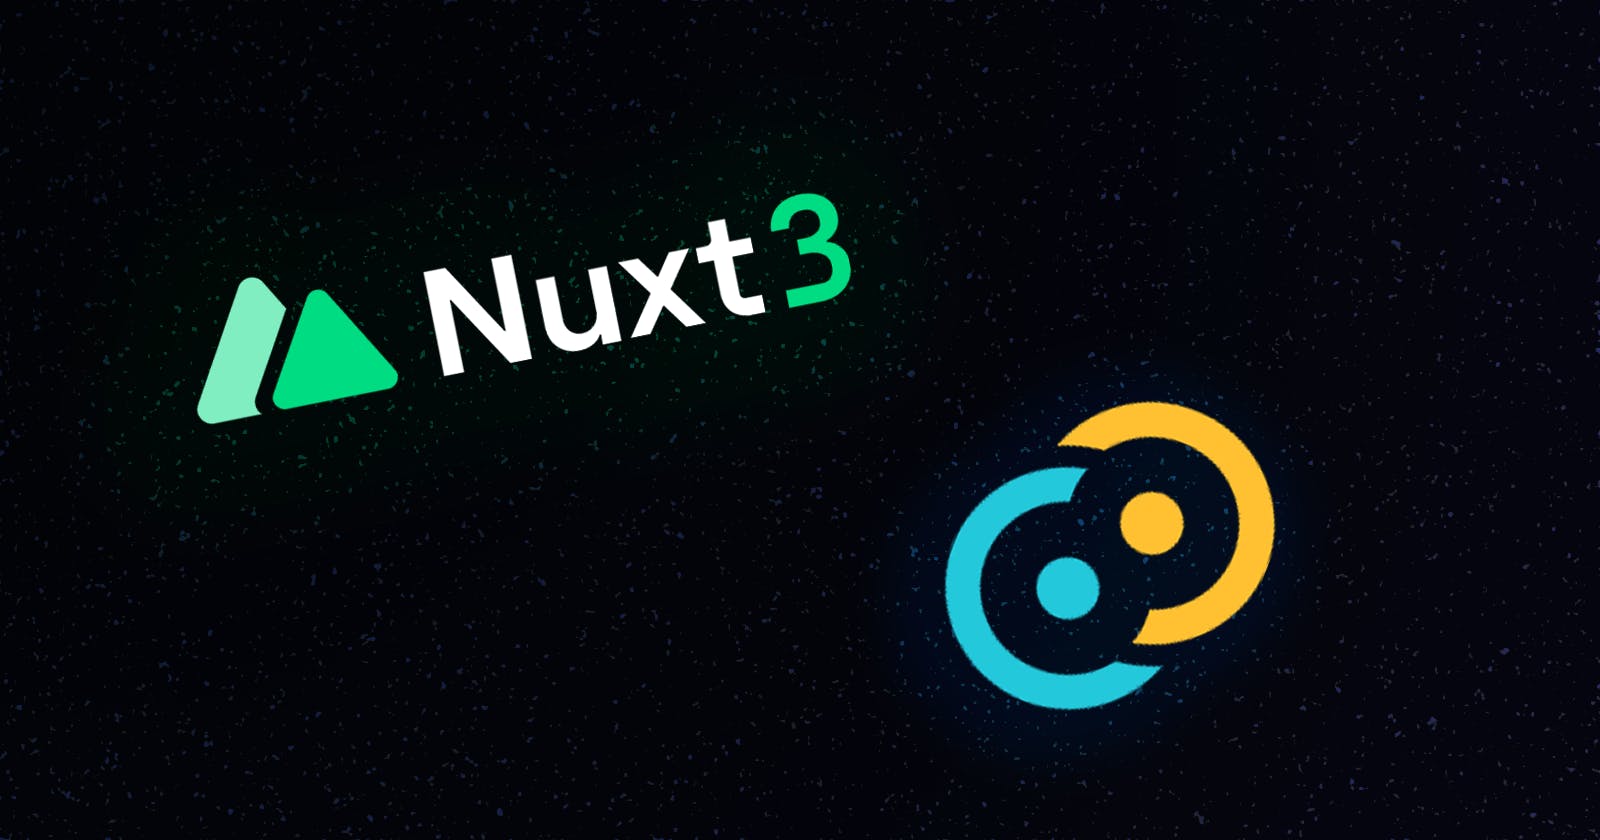 Building Tauri app with Nuxt 3 as frontend